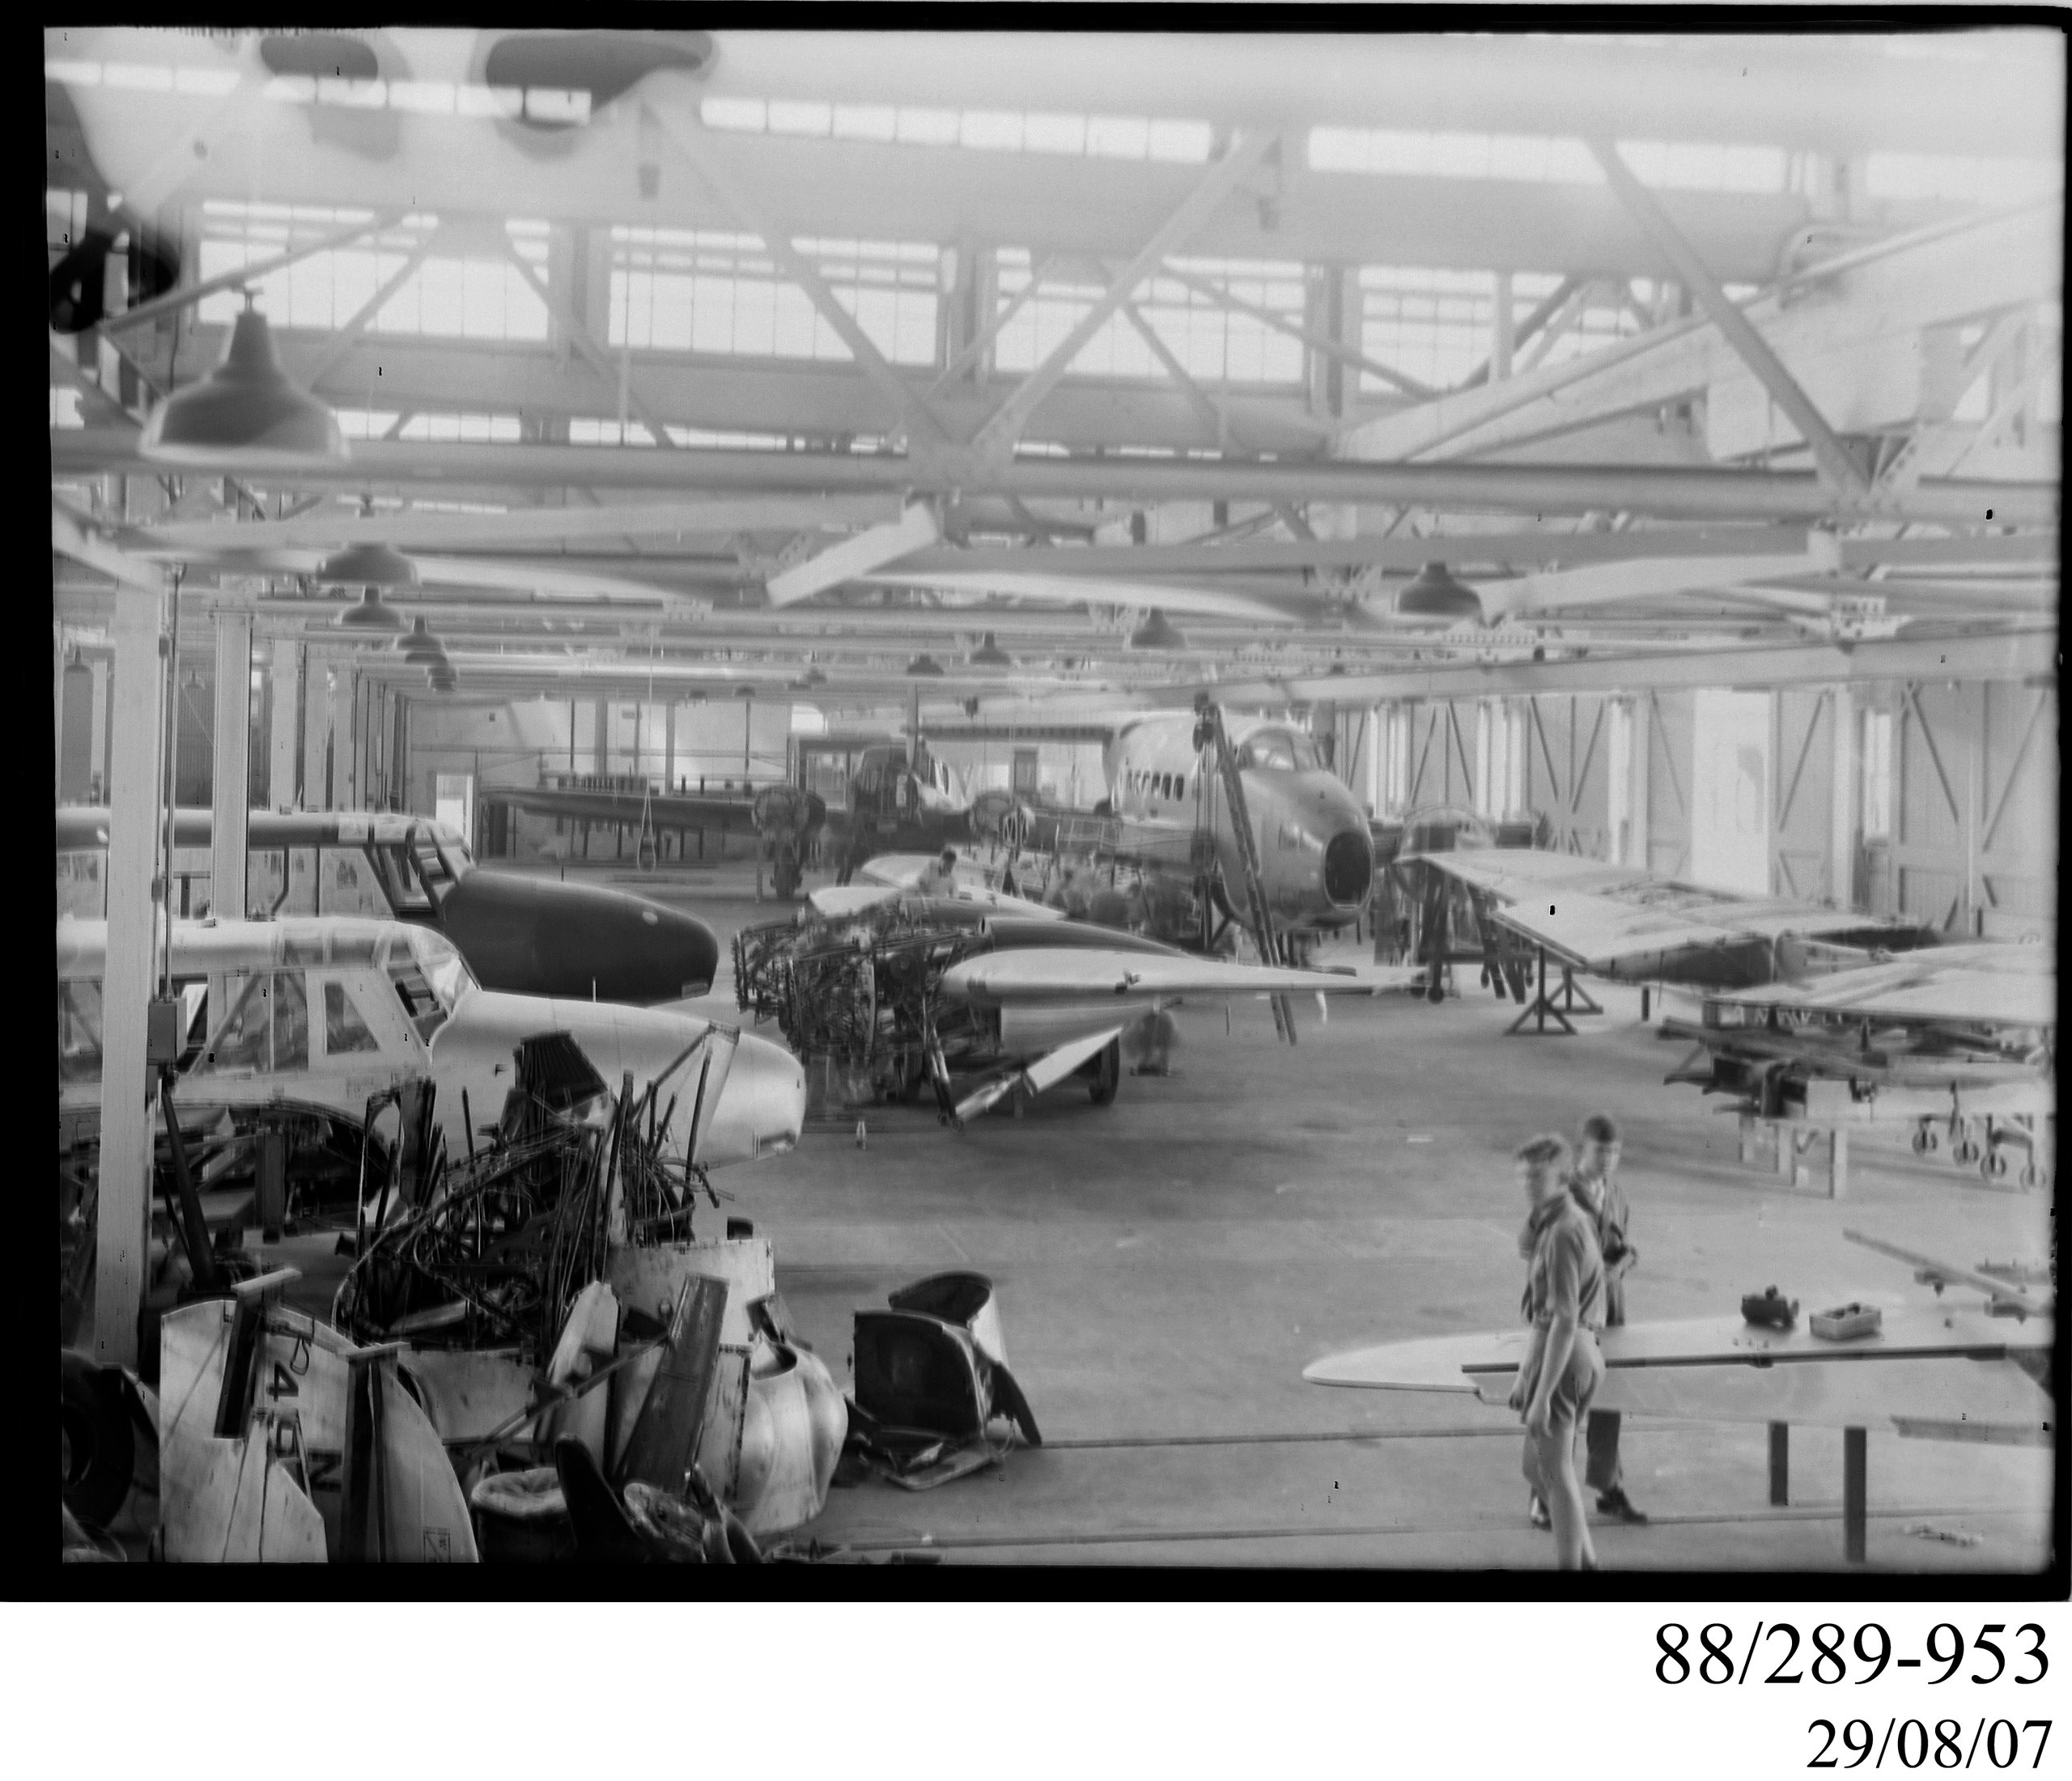 Glass plate negative of the general view of aircraft in workshops